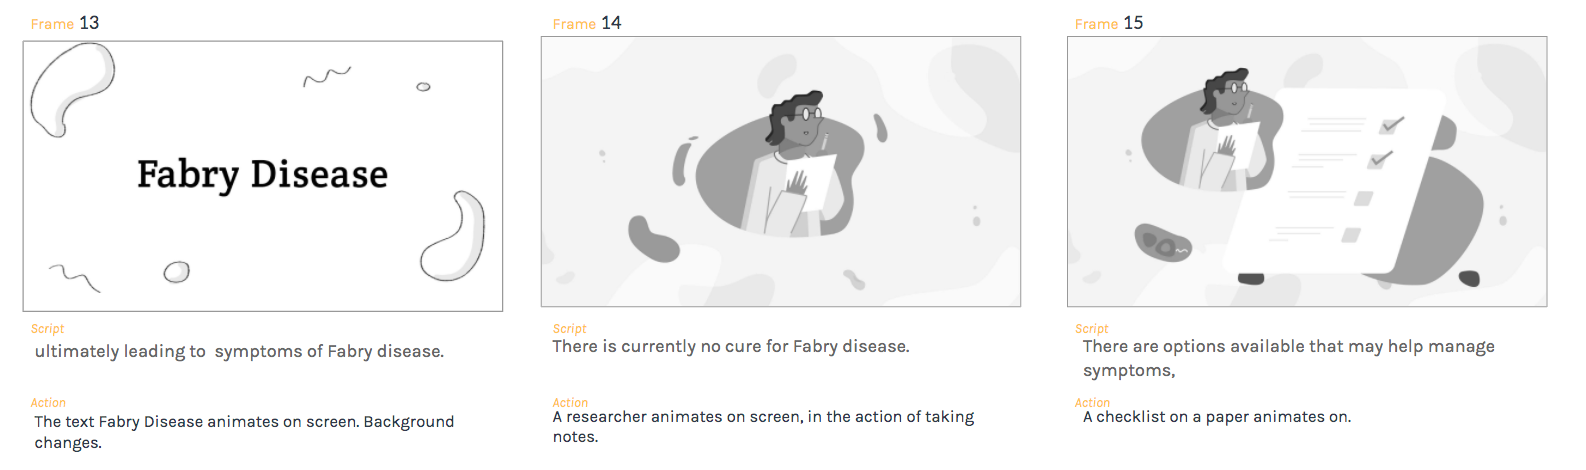 These storyboards from a video about Fabry Disease show how our overarching visual approach utilizes text, characters and cell-like shapes.